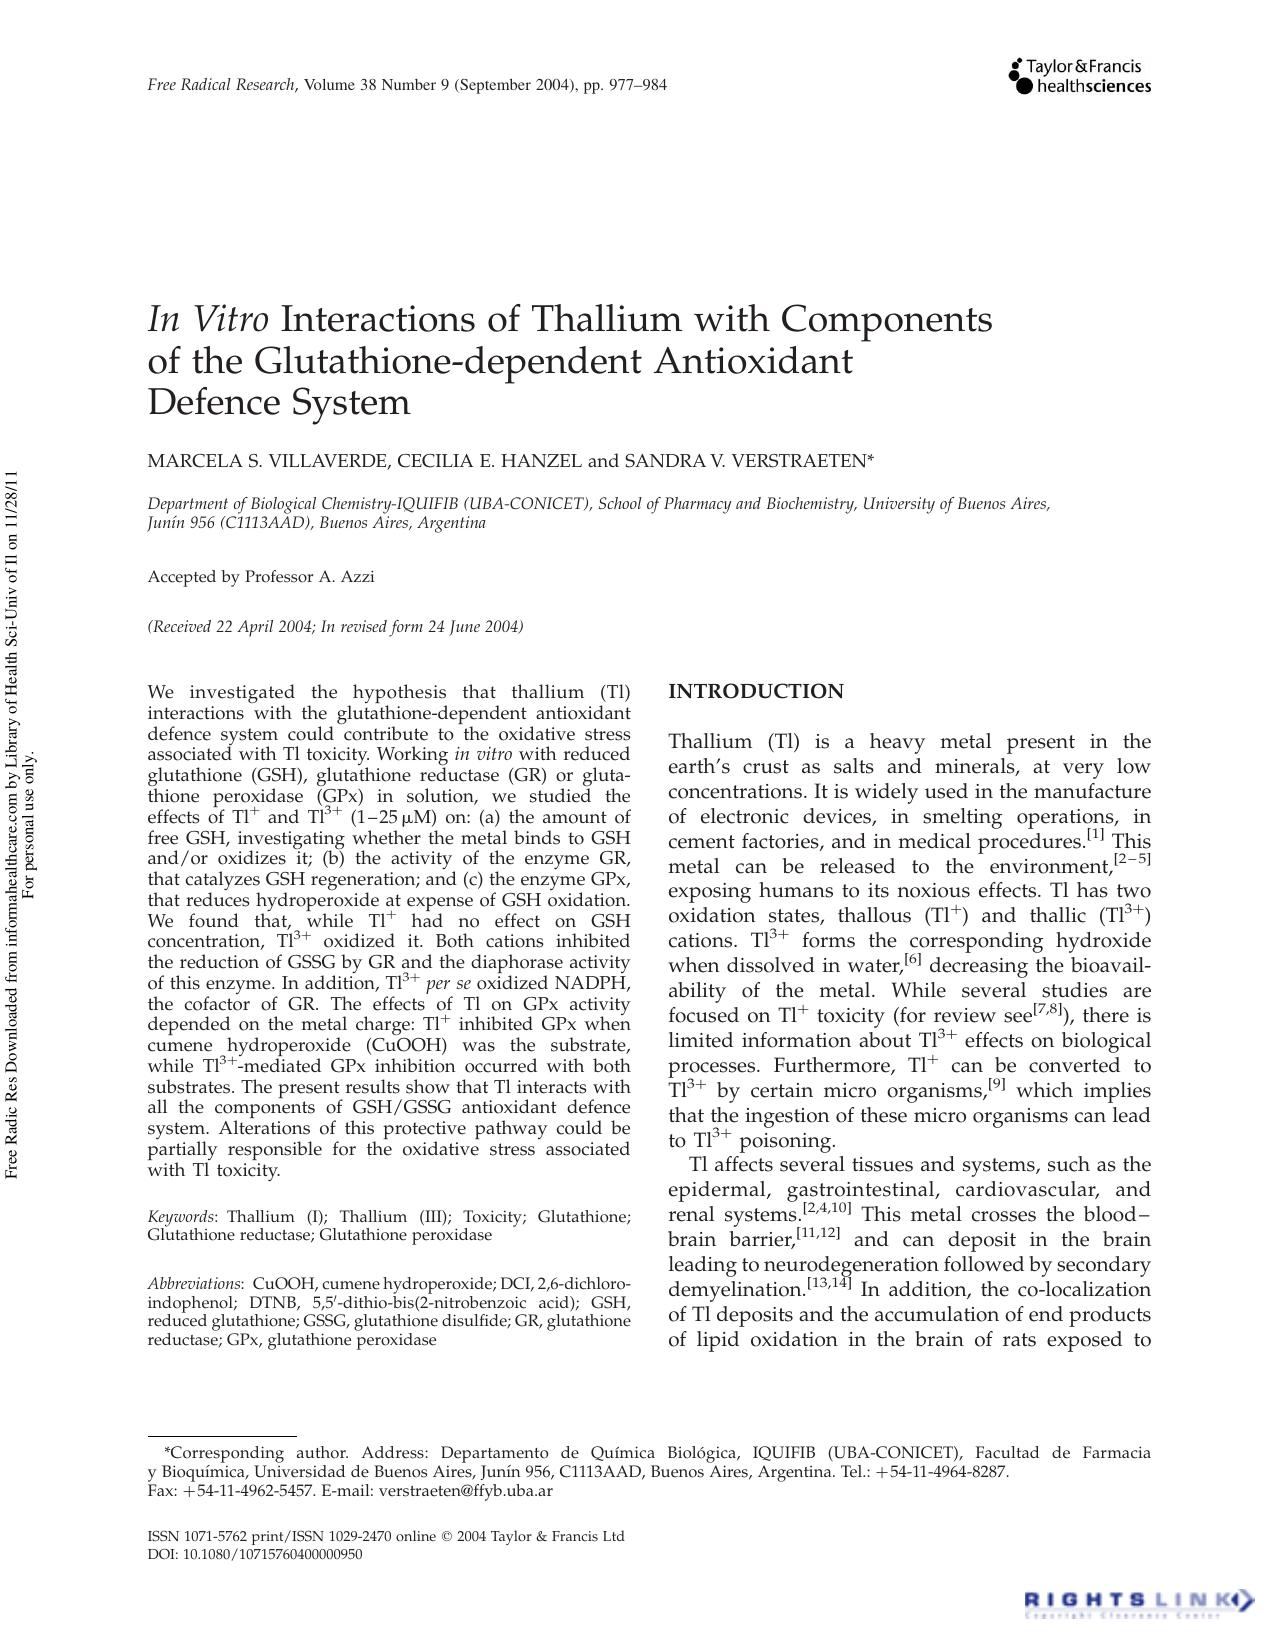 &lt;emph type="2"&gt;In Vitro&lt;emph&gt; Interactions of Thallium with Components of the Glutathione-dependent Antioxidant Defence System by Marcela S. Villaverde Cecilia E. Hanzel & Sandra V. Verstraeten